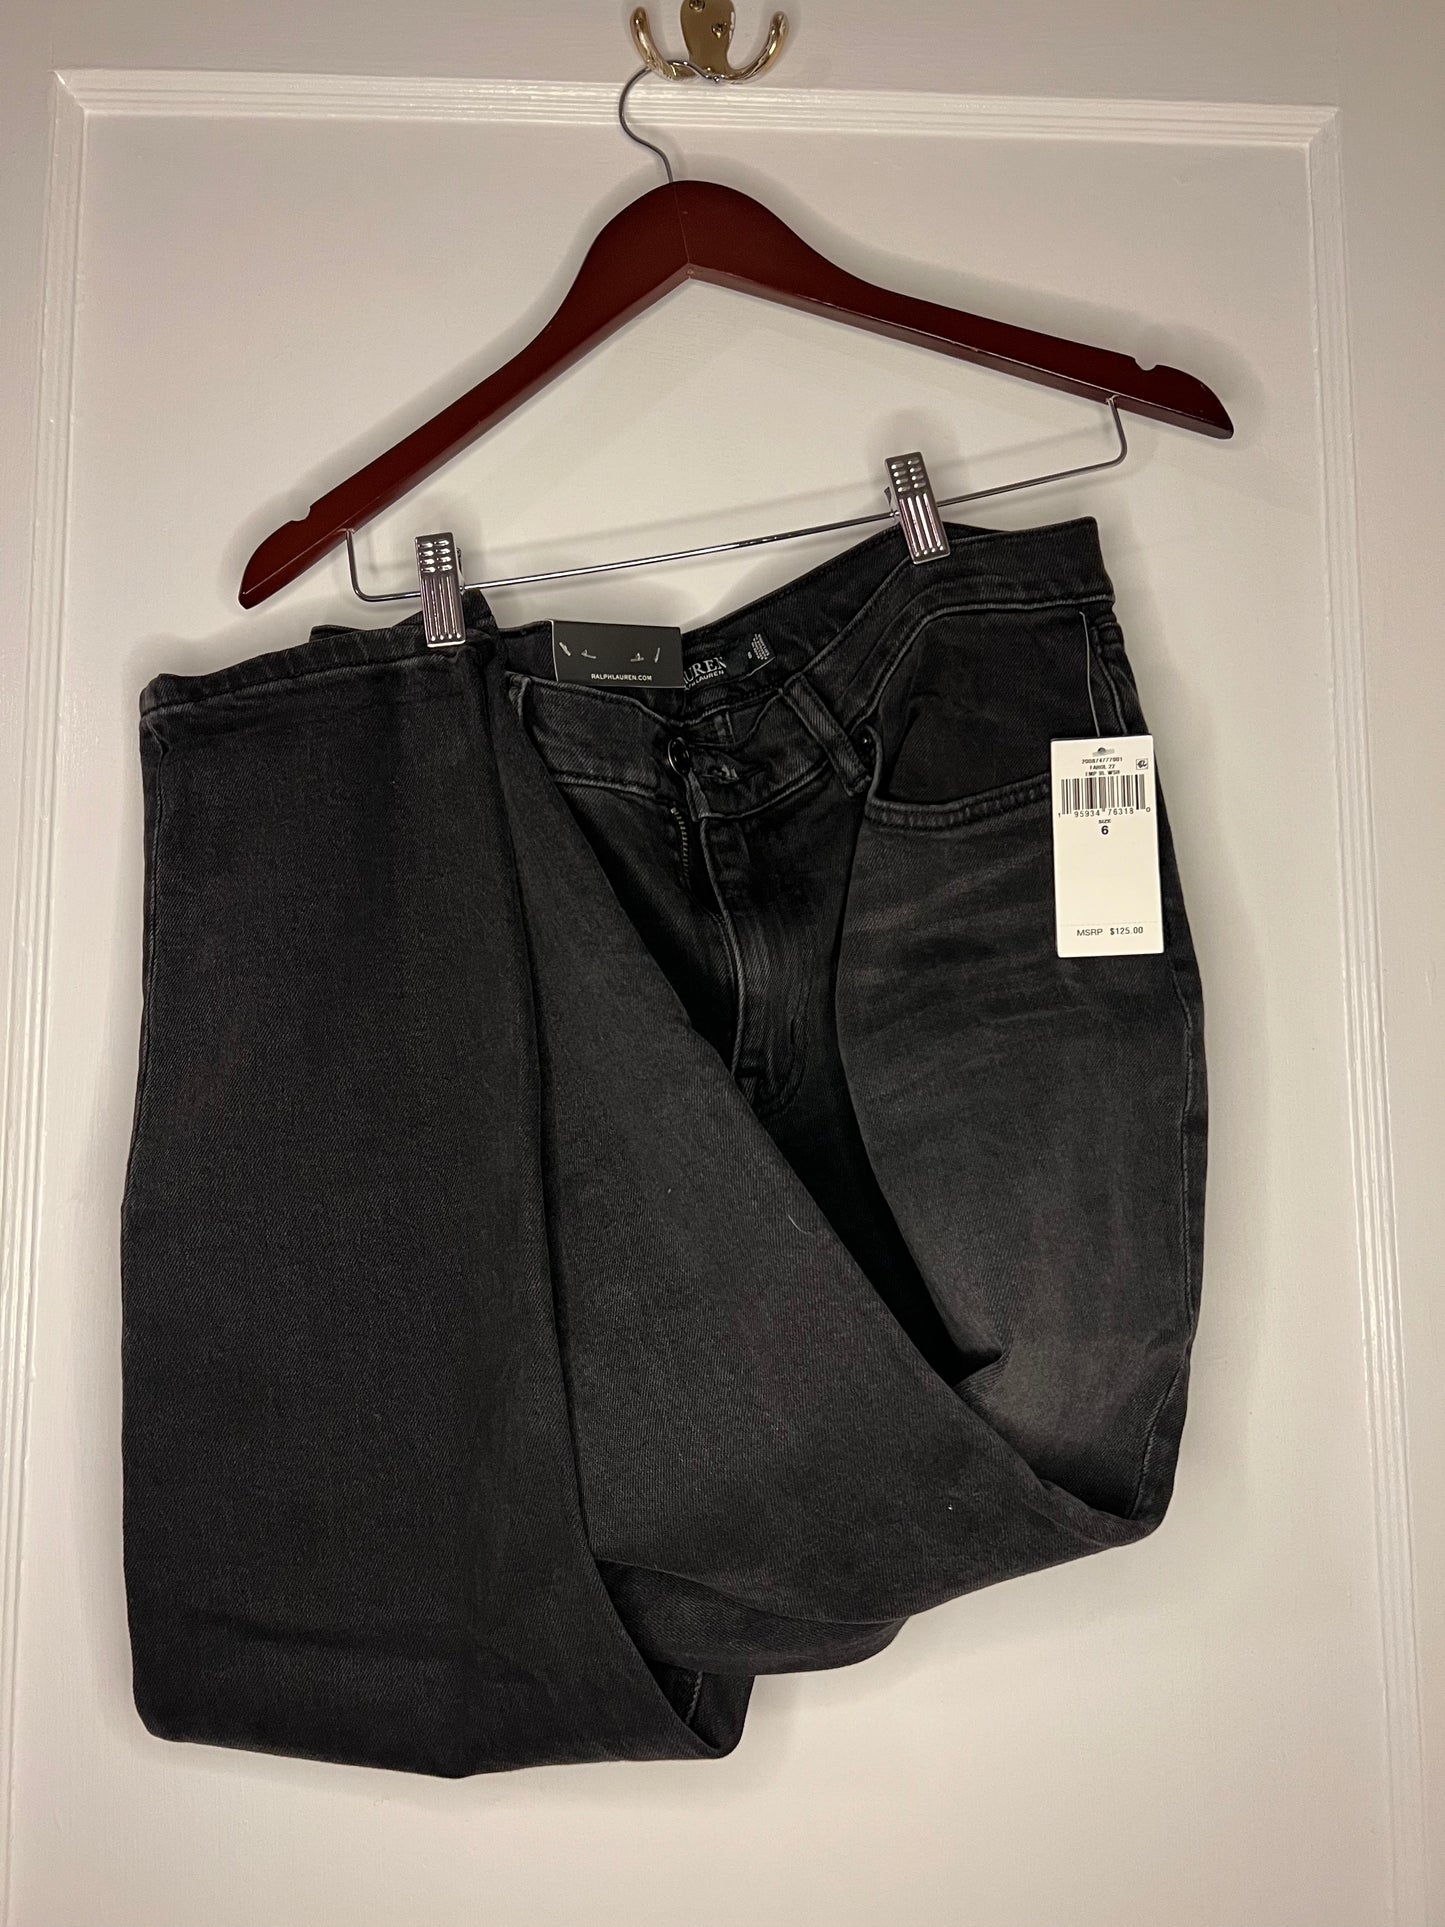 NWT Ralph Lauren Relaxed Fit Jeans Size 6 / 28 Waist PPU 45208 or SCO Spring Sale